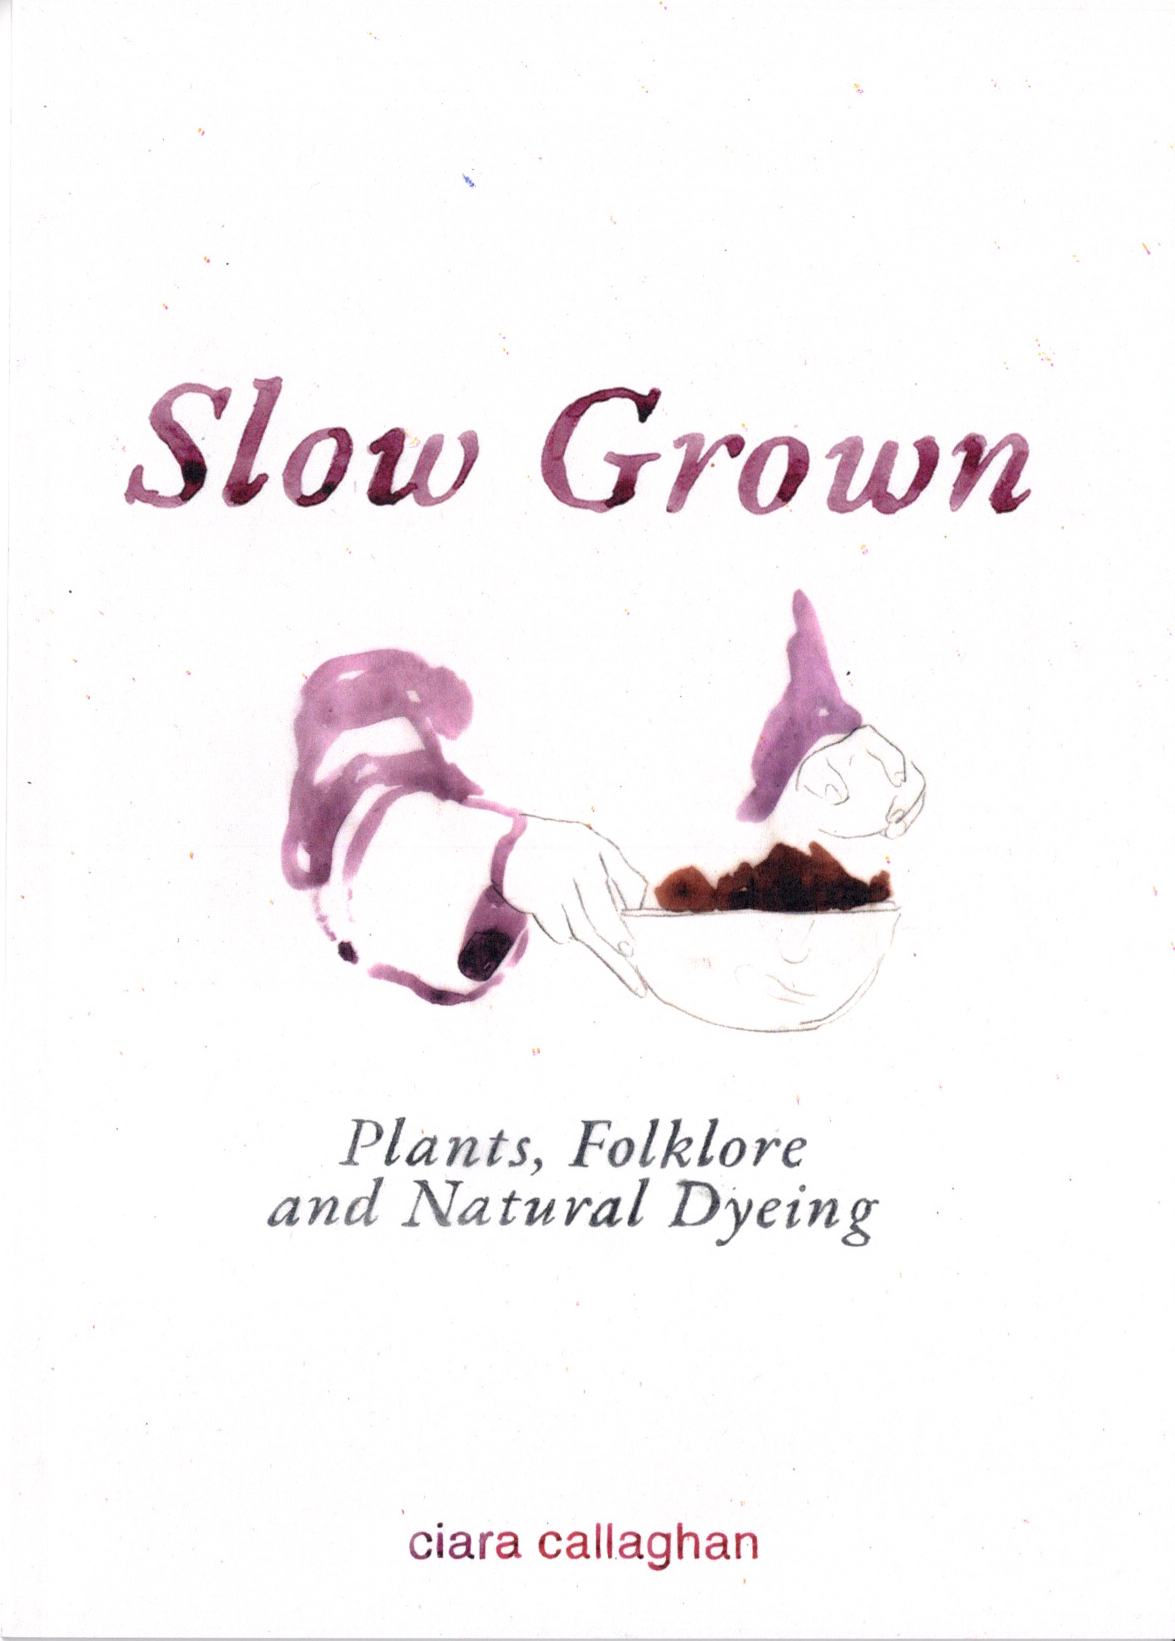 Slow Grown: Plants, Folklore and Natural Dyeing, Ciara Callaghan